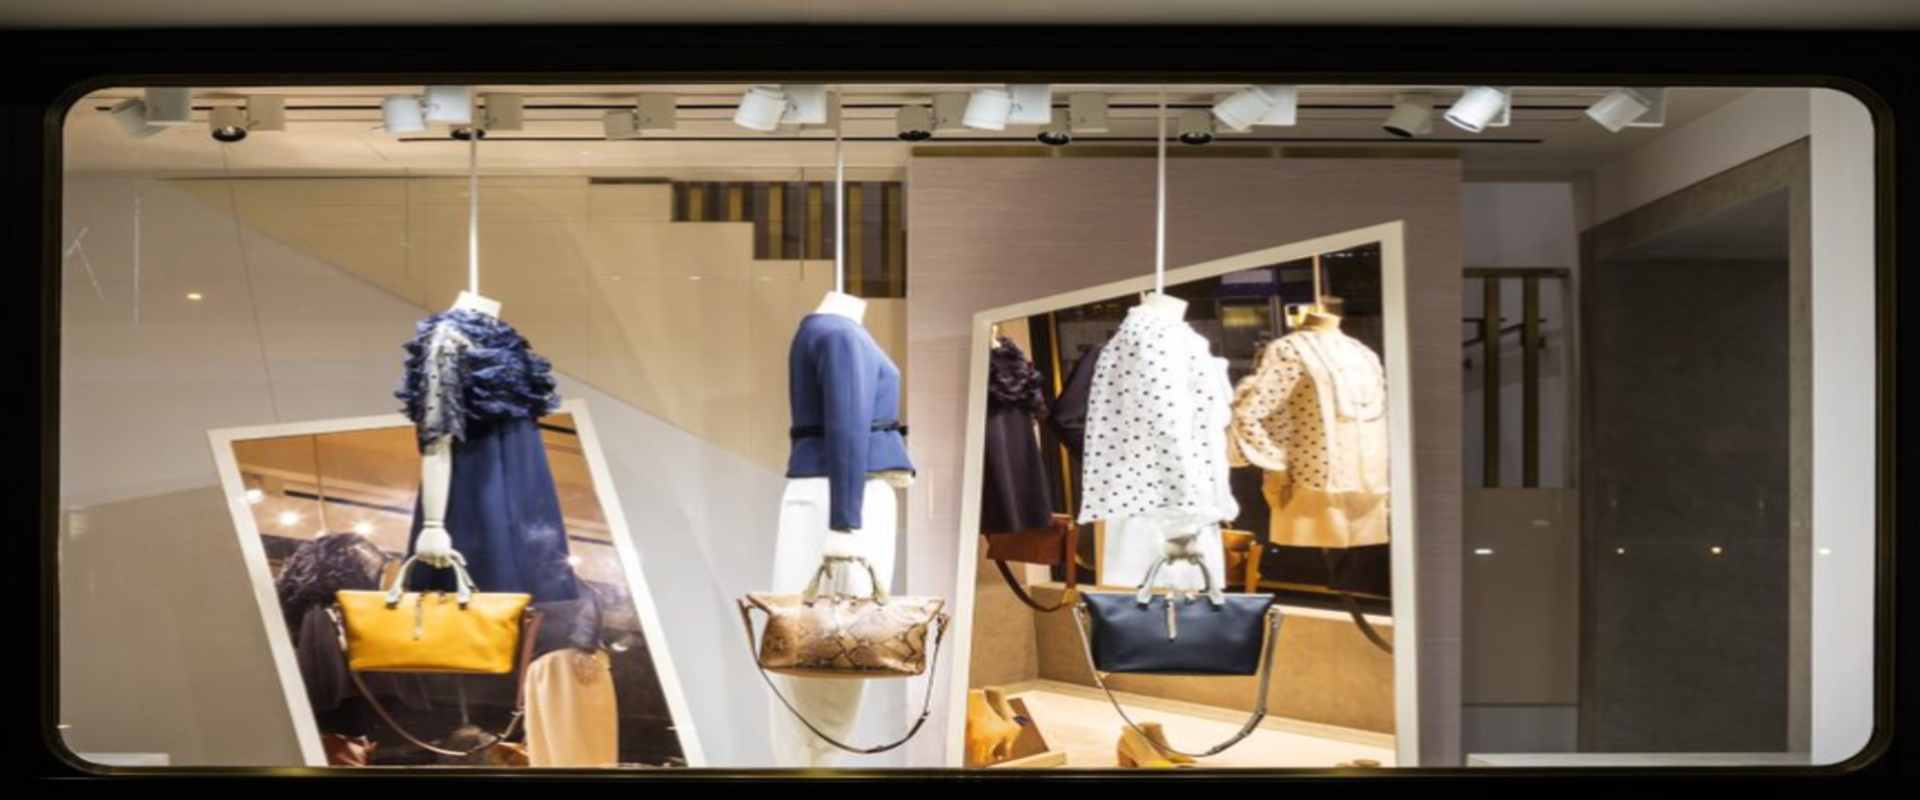 Visual Merchandising: Meaning, Scope & Elements of Visual